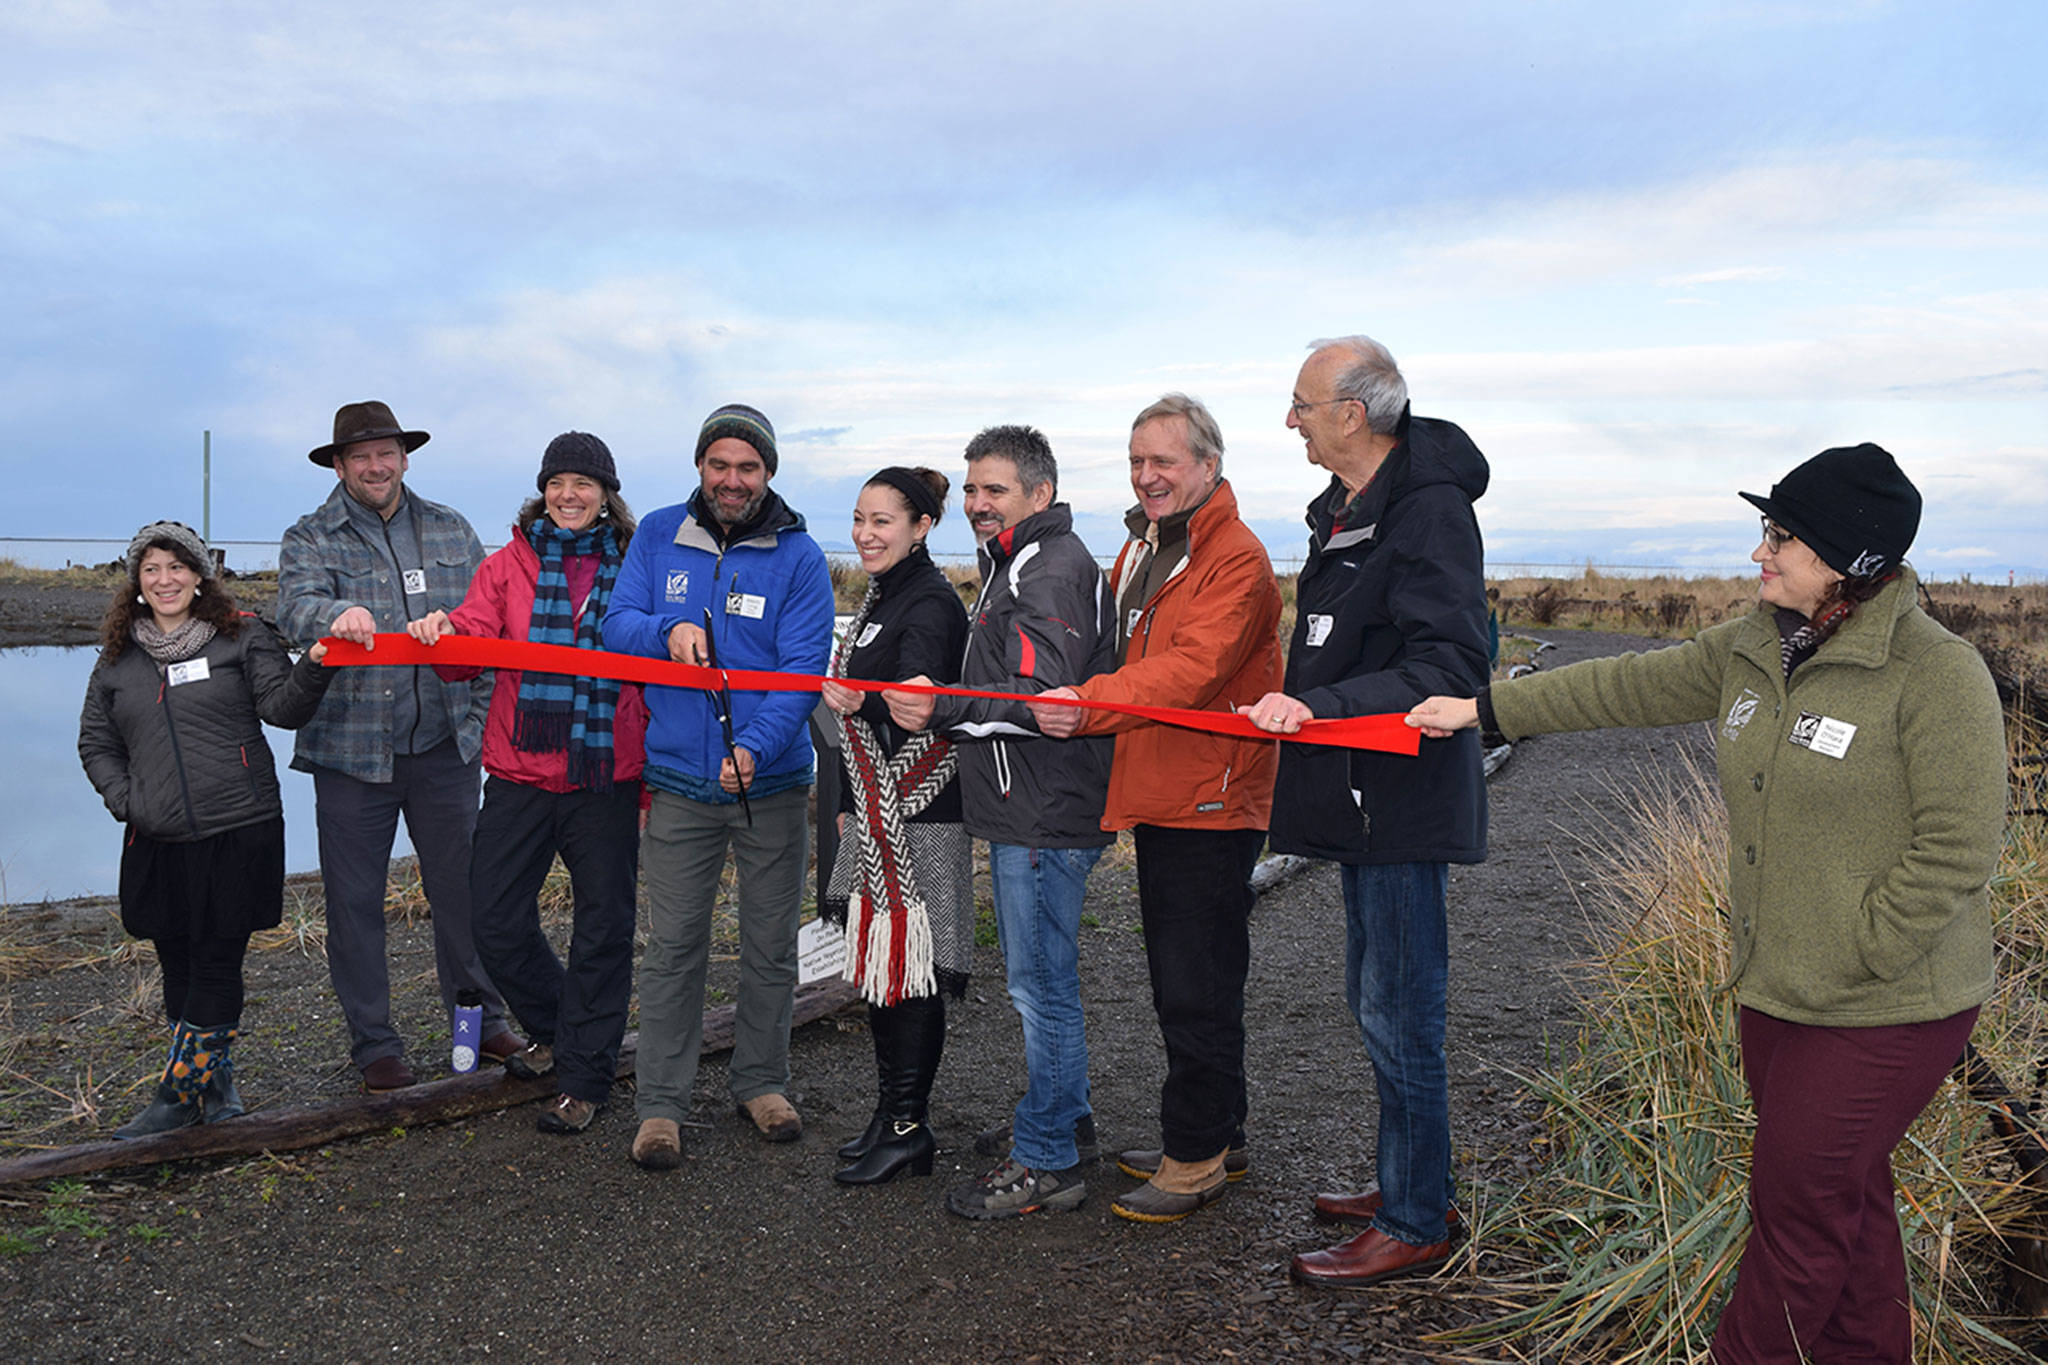 The North Olympic Salmon Coalition (NOSC ) celebrated a ribbon cutting for its 3 Crabs nearshore and estuarine restoration project at the public access point off 3 Crabs Road. From left are Sarah Albert, NOSC administrative assistant; state Rep. Mike Chapman; Rebecca Benjamin, NOSC executive director; Kevin Long, NOSC project manager; Loni Grinnell-Greninger, Jamestown S’Klallam Tribe; Kurt Grinnell, Jamestown S’klallam Tribe; state Rep. Steve Tharinger; Phil Rockefeller, Washington State Recreation & Conservation Office; and Nicole O’Hara, NOSC development manager. (Erin Hawkins/Olympic Peninsula News Group)